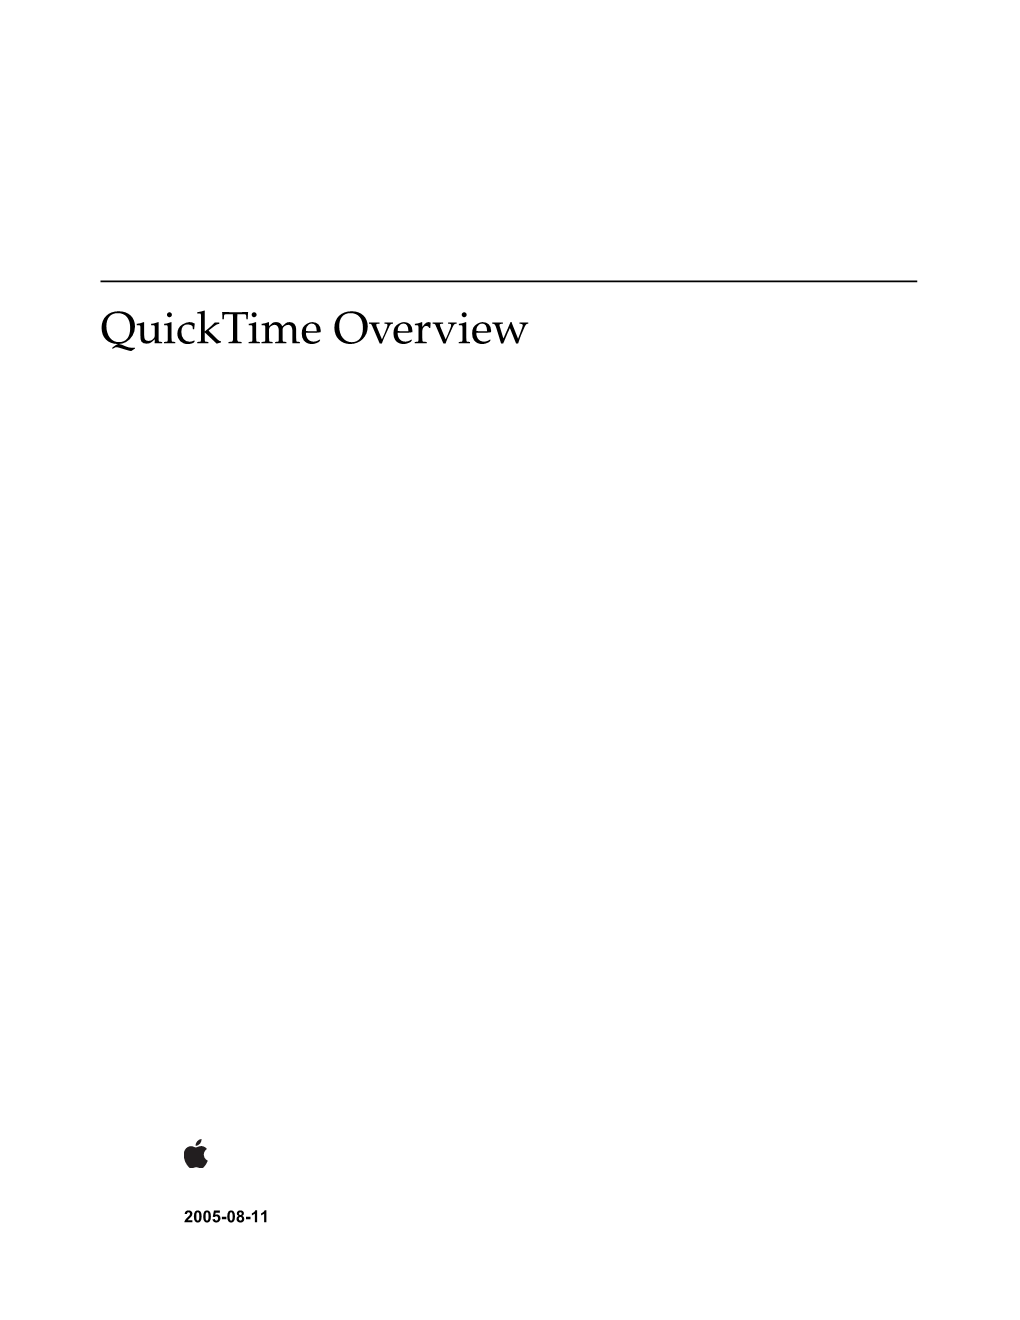 Quicktime Overview